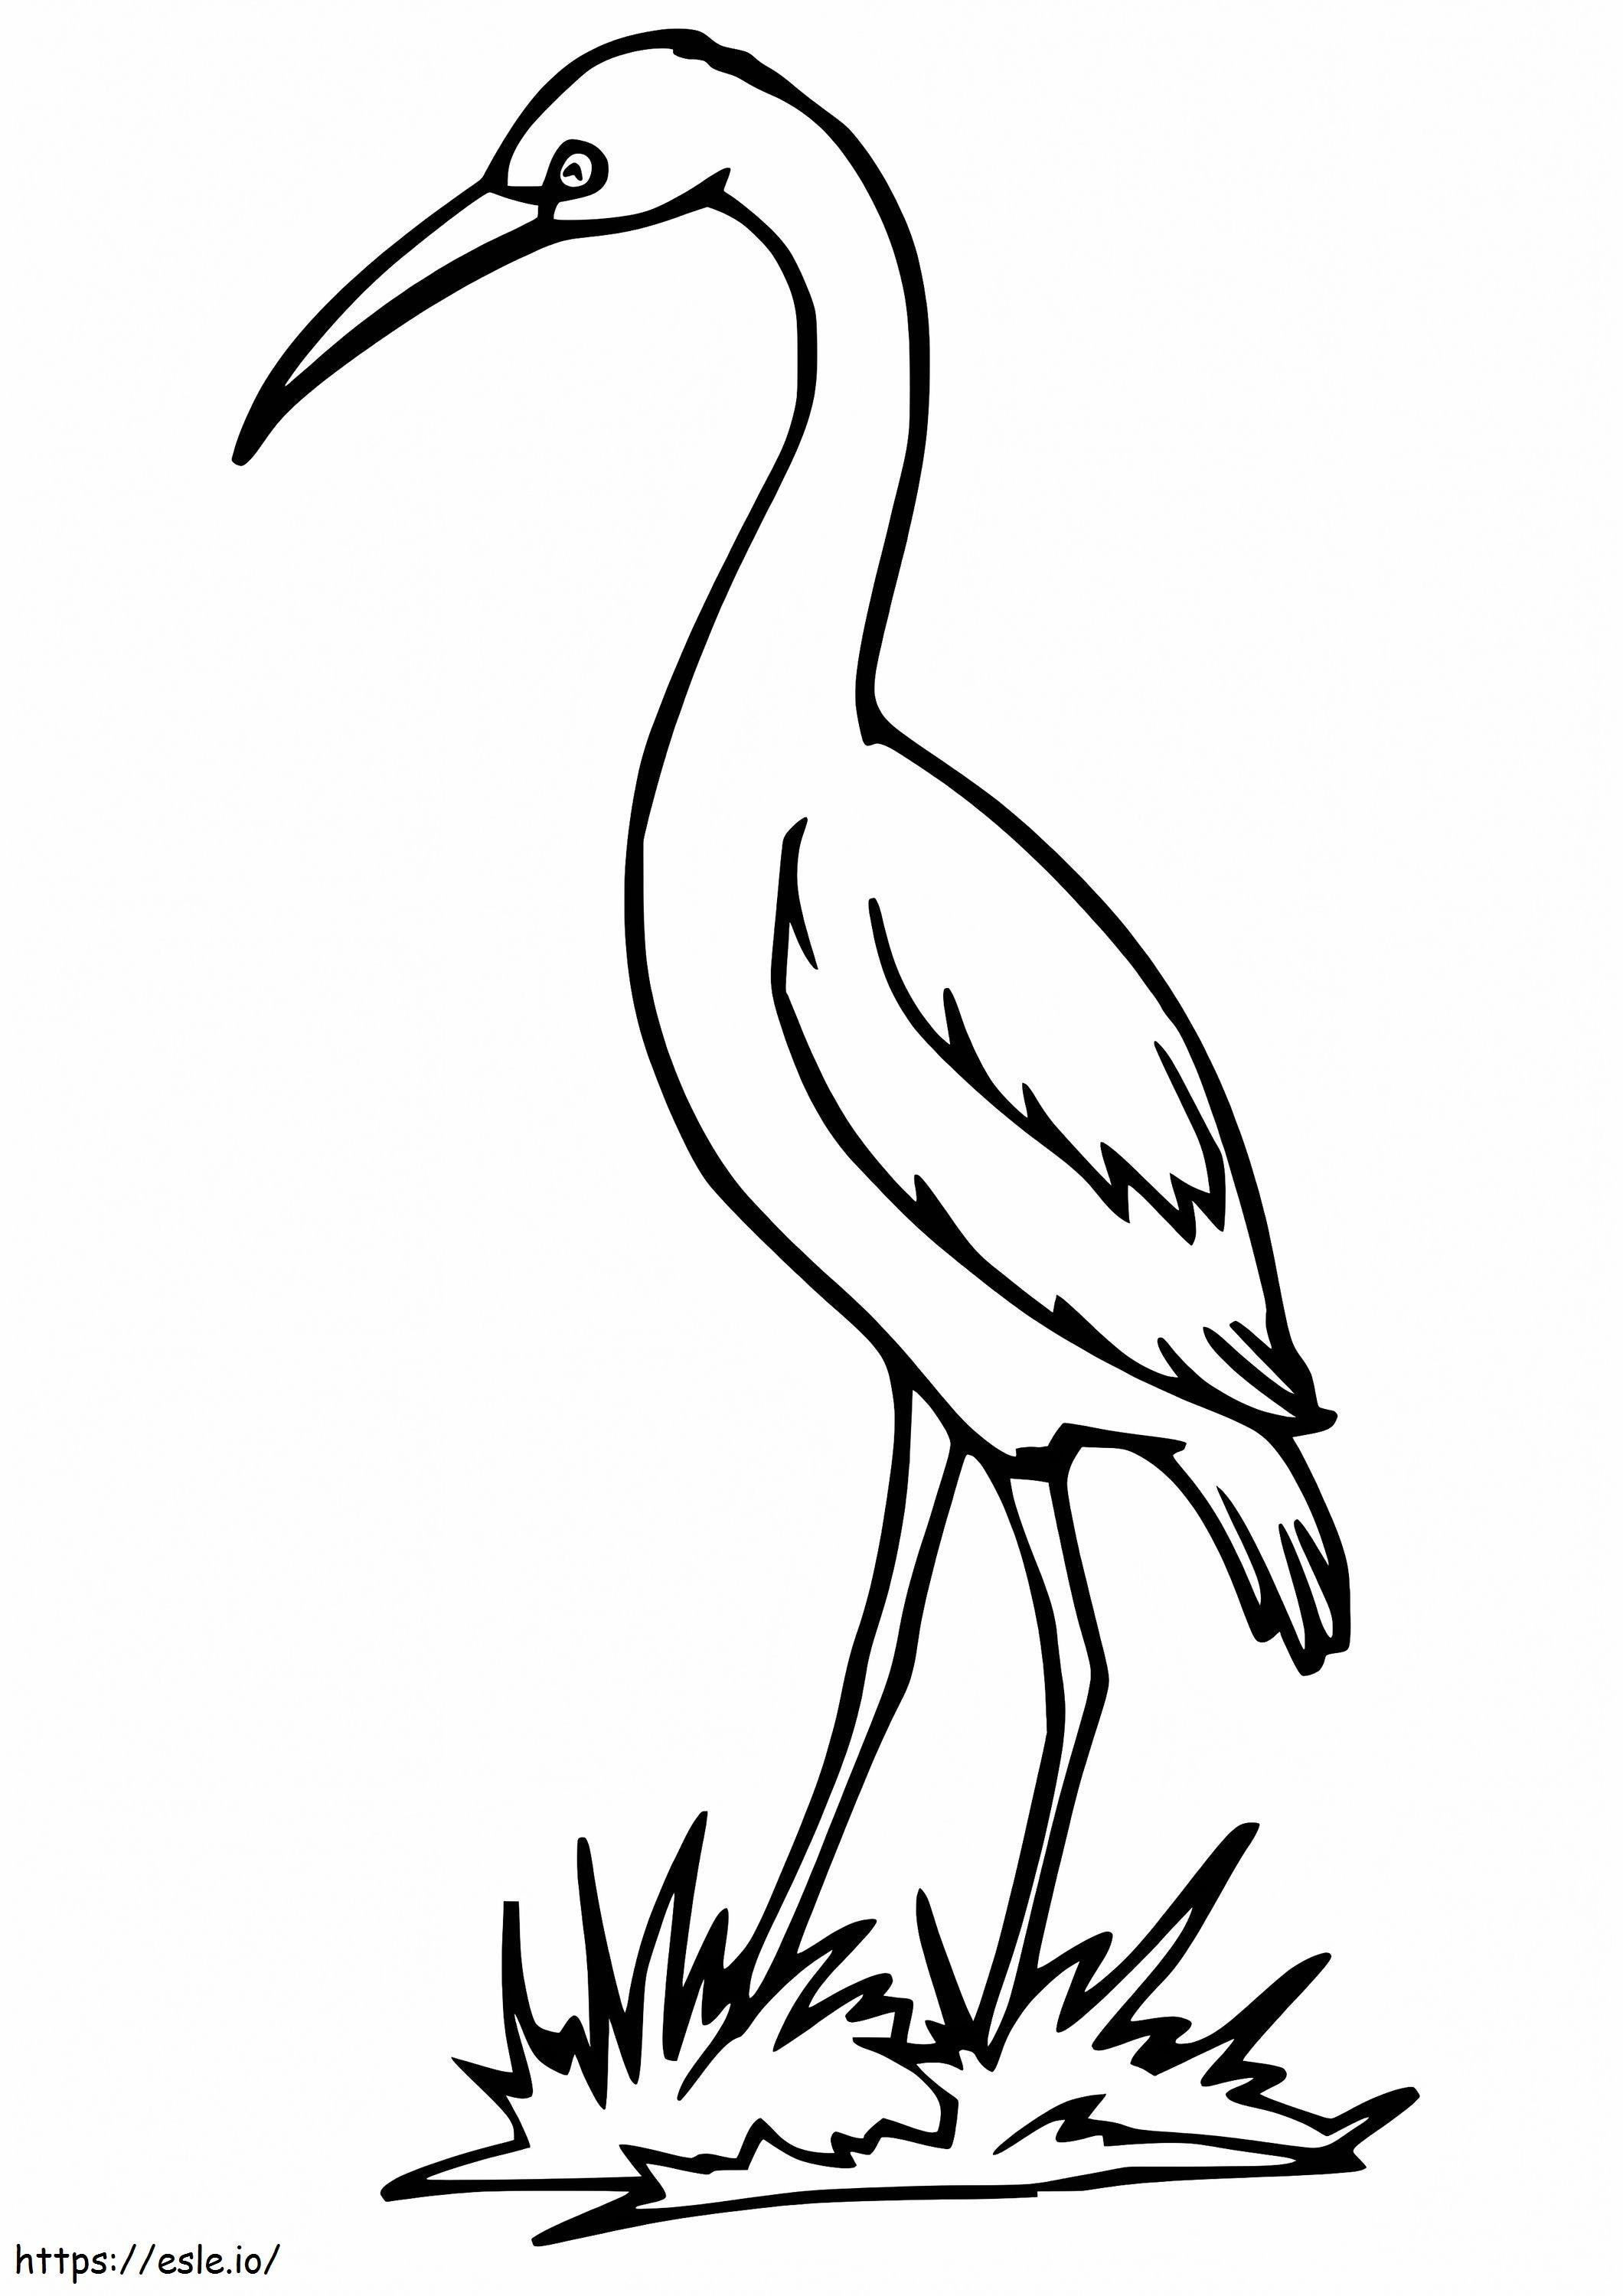 Stork On Grass coloring page